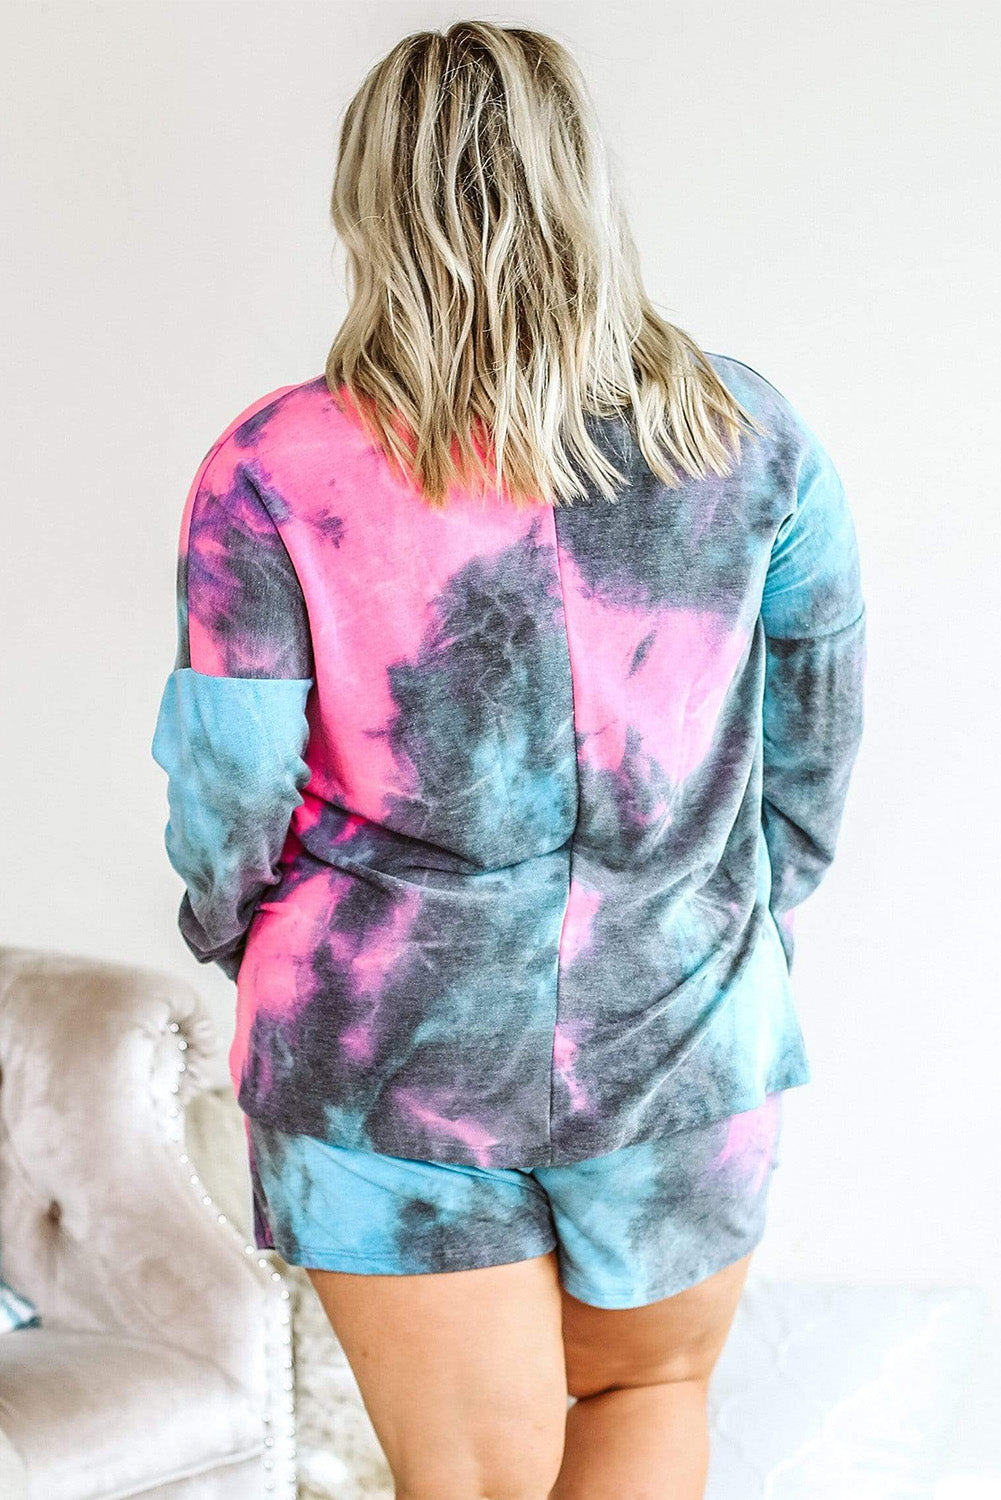 Multicolor Tie-dyed Long Sleeve Top and Shorts Plus Size Lounge Wear